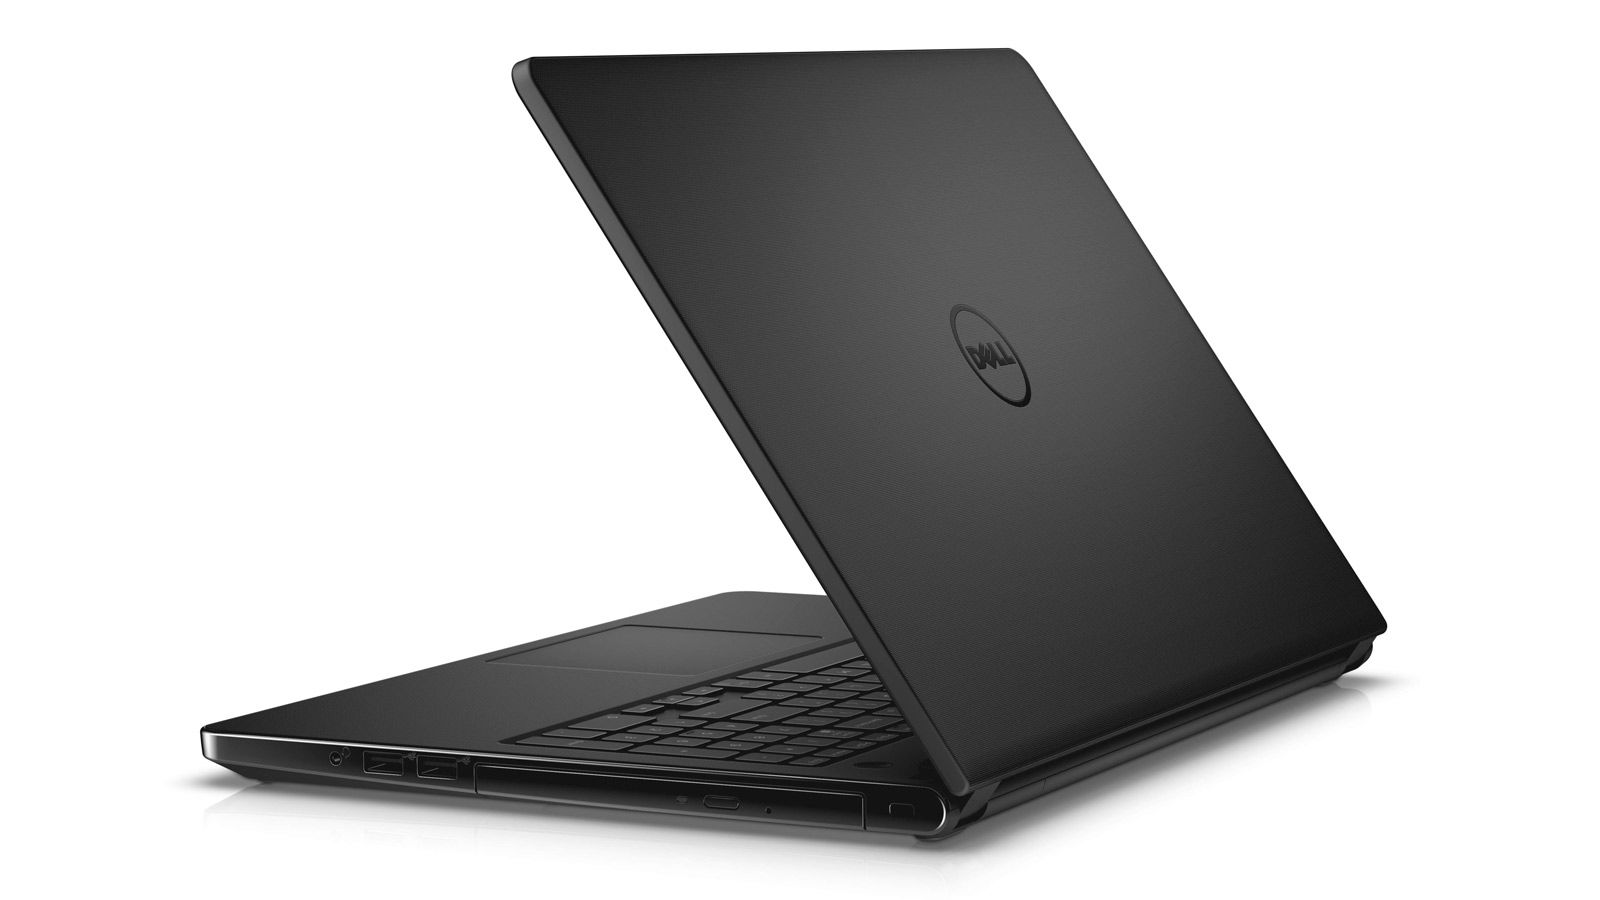 dell inspiron 5558 drivers for windows 10